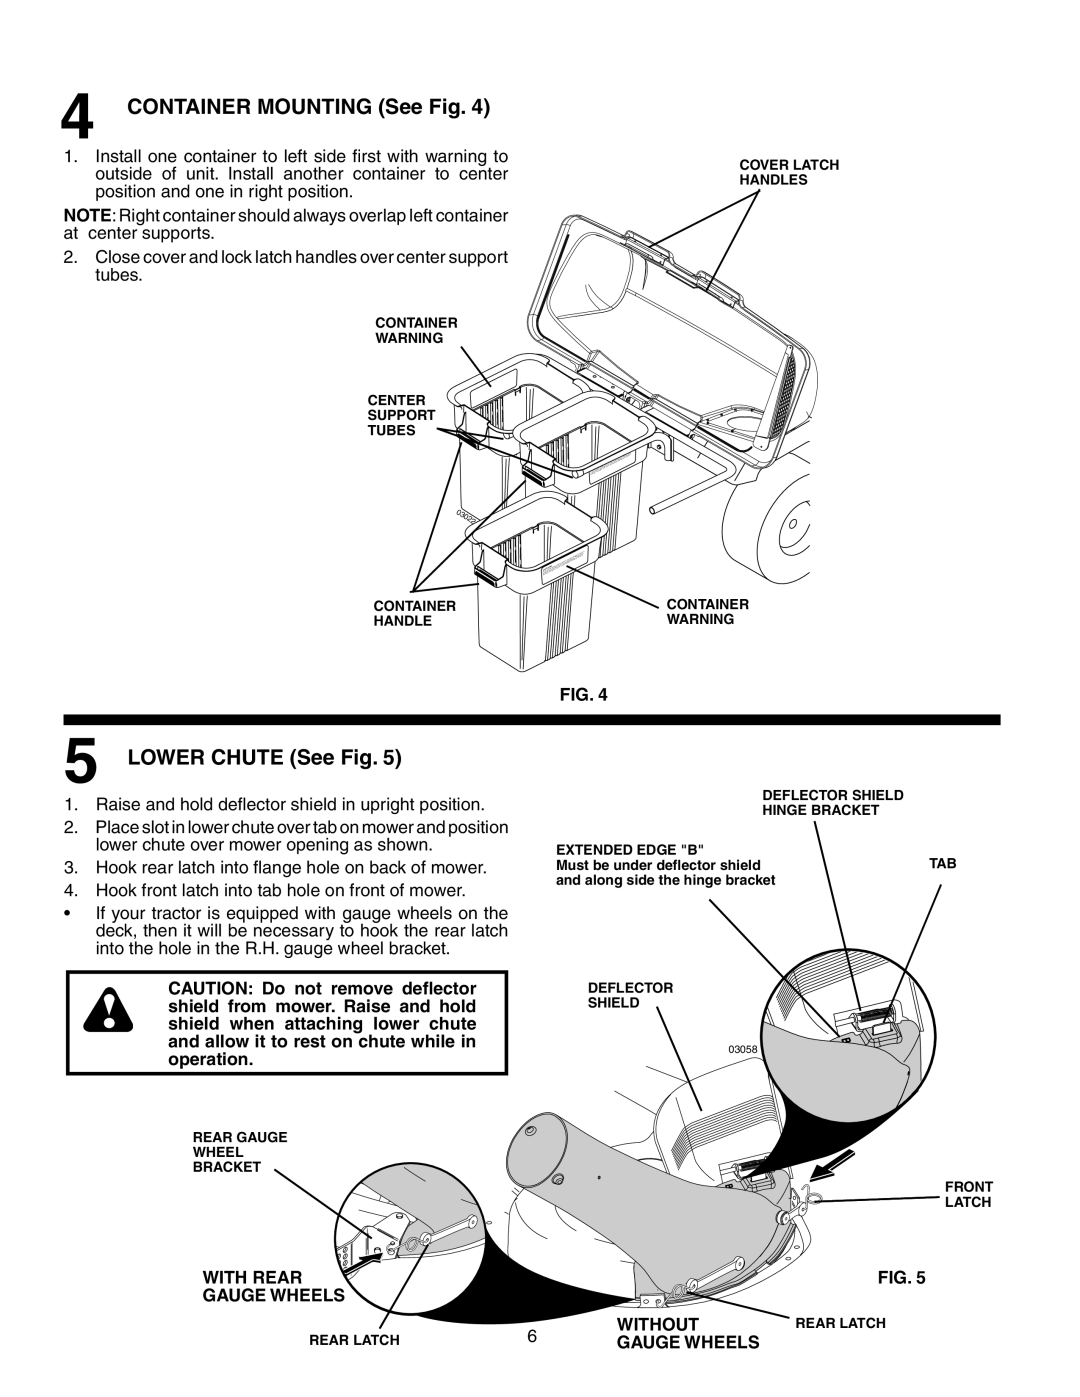 Poulan 960 72 00-11, GTT342, 96072001100, 532402705 owner manual CONTAINER MOUNTING See Fig, LOWER CHUTE See Fig 